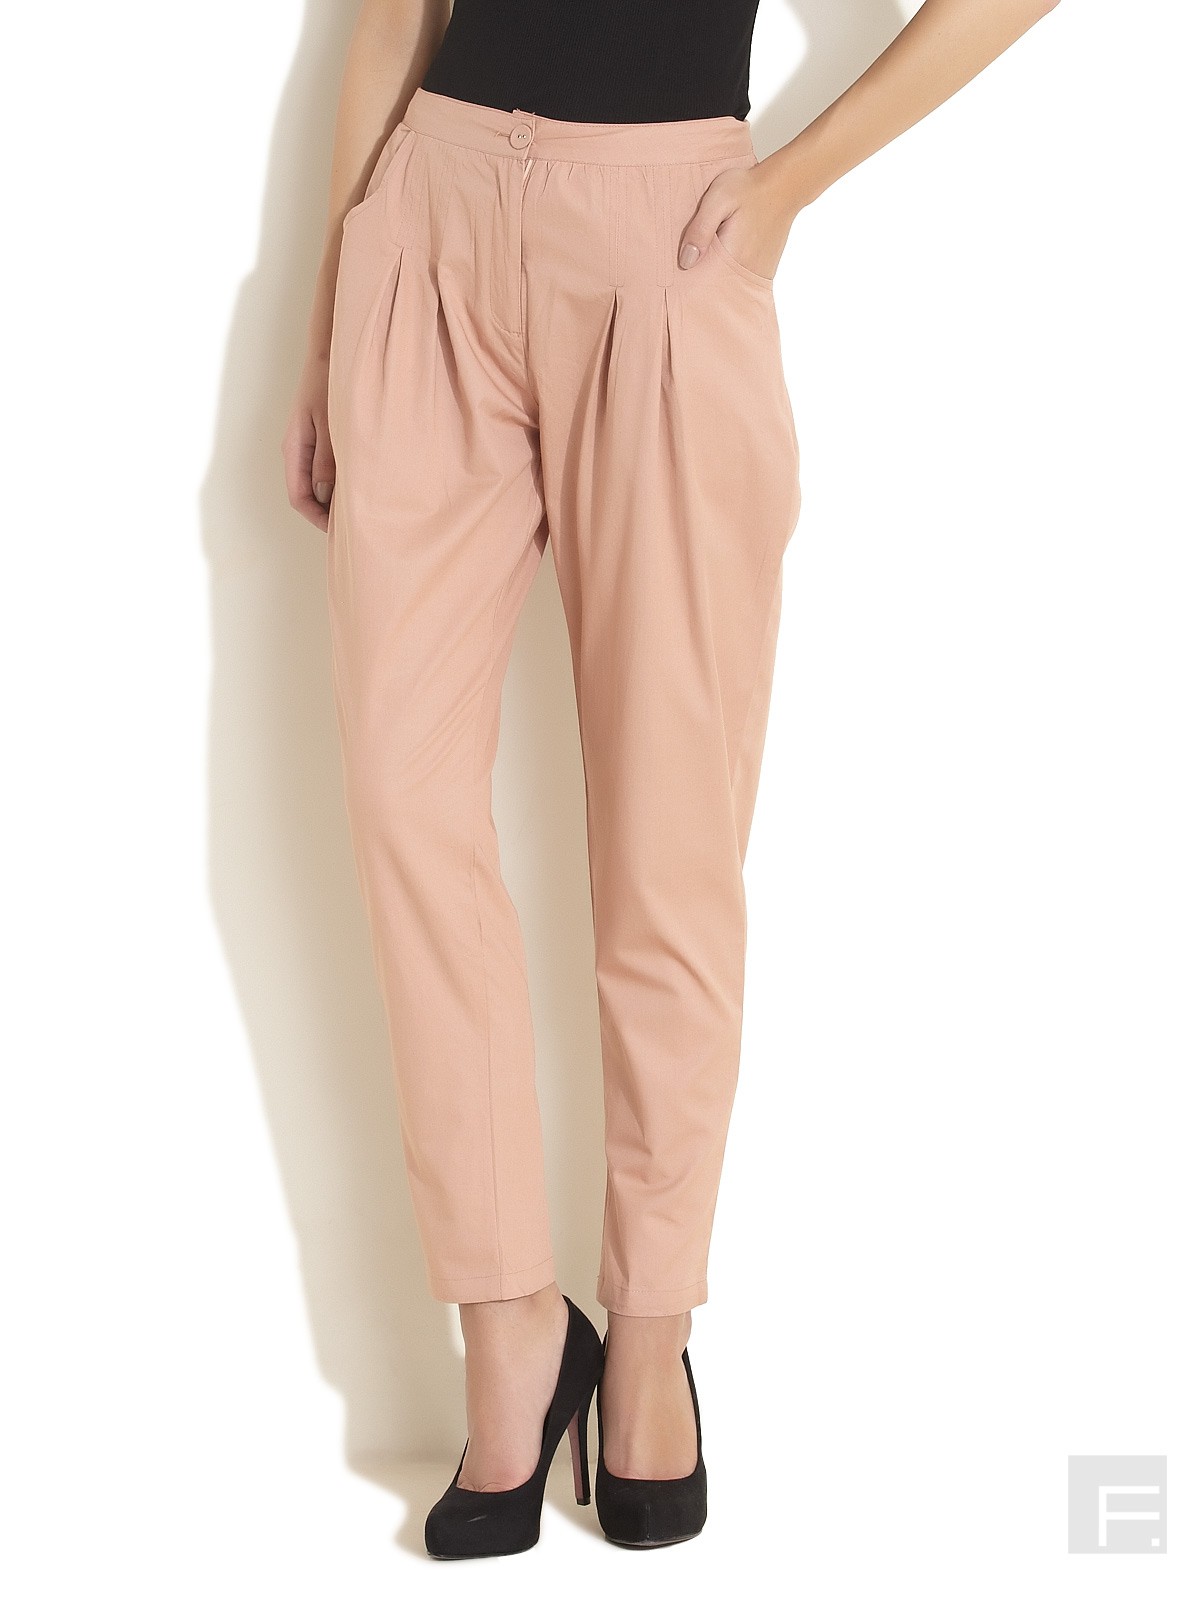 Trousers For Women: must For Each Wardrobe – thefashiontamer.com1200 x 1600